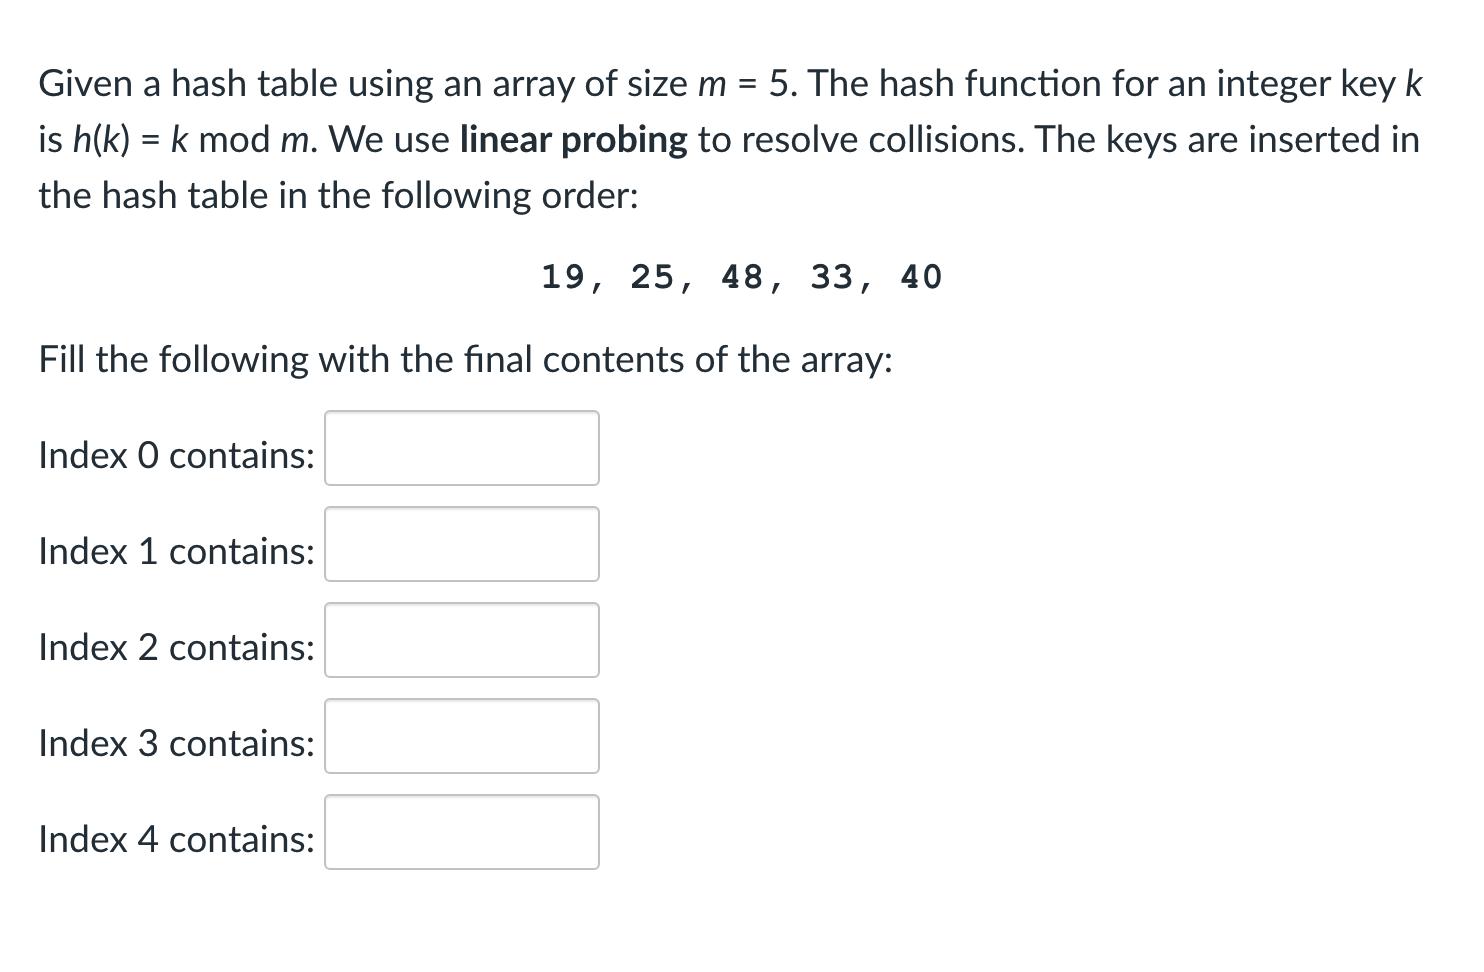 Given a hash table using an array of size m = 5. The hash function for an integer key k is h(k) = k mod m. We